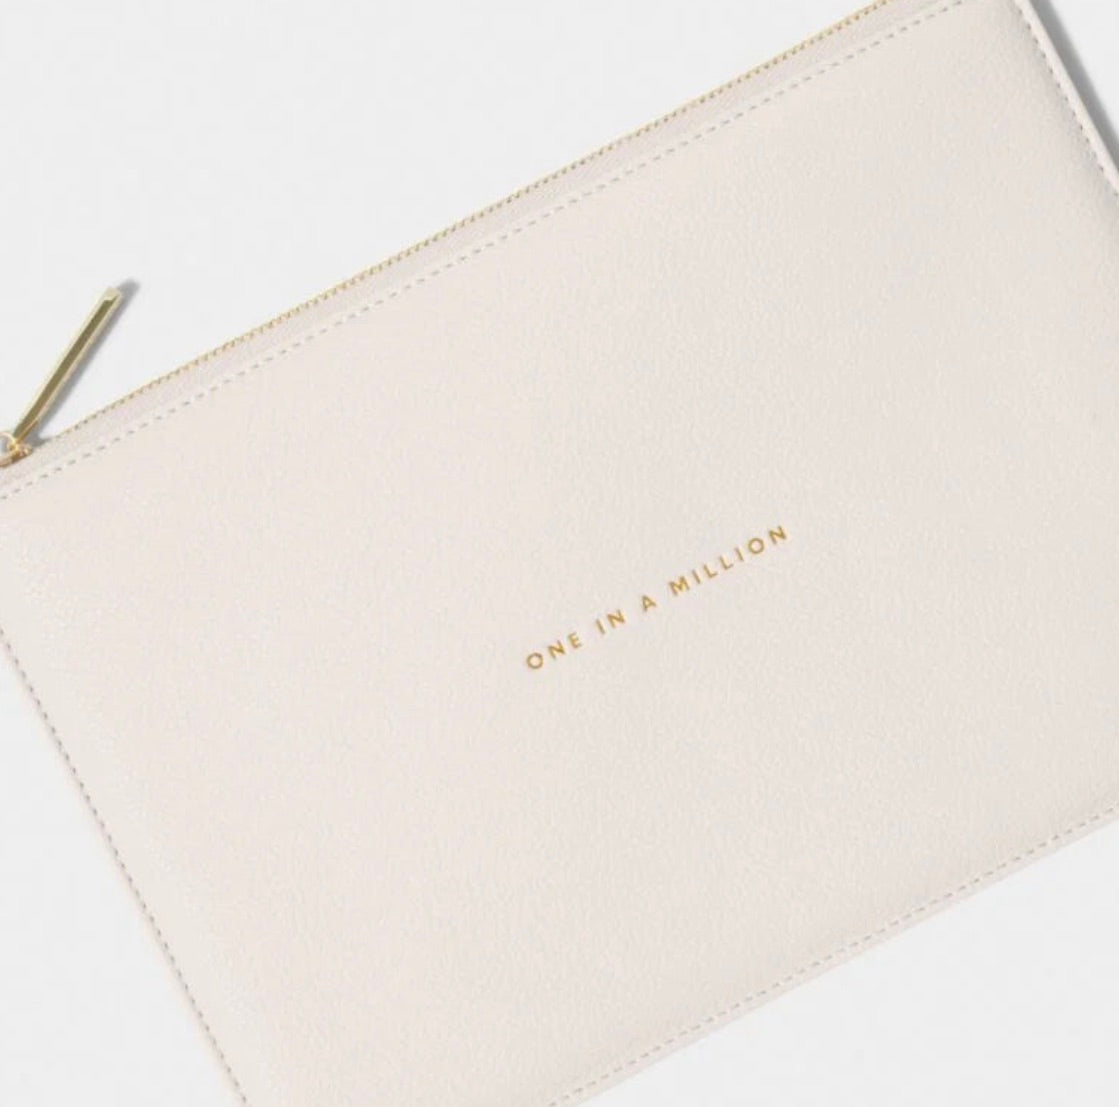 Katie Loxton Pouch - One in a Million - Eggshell